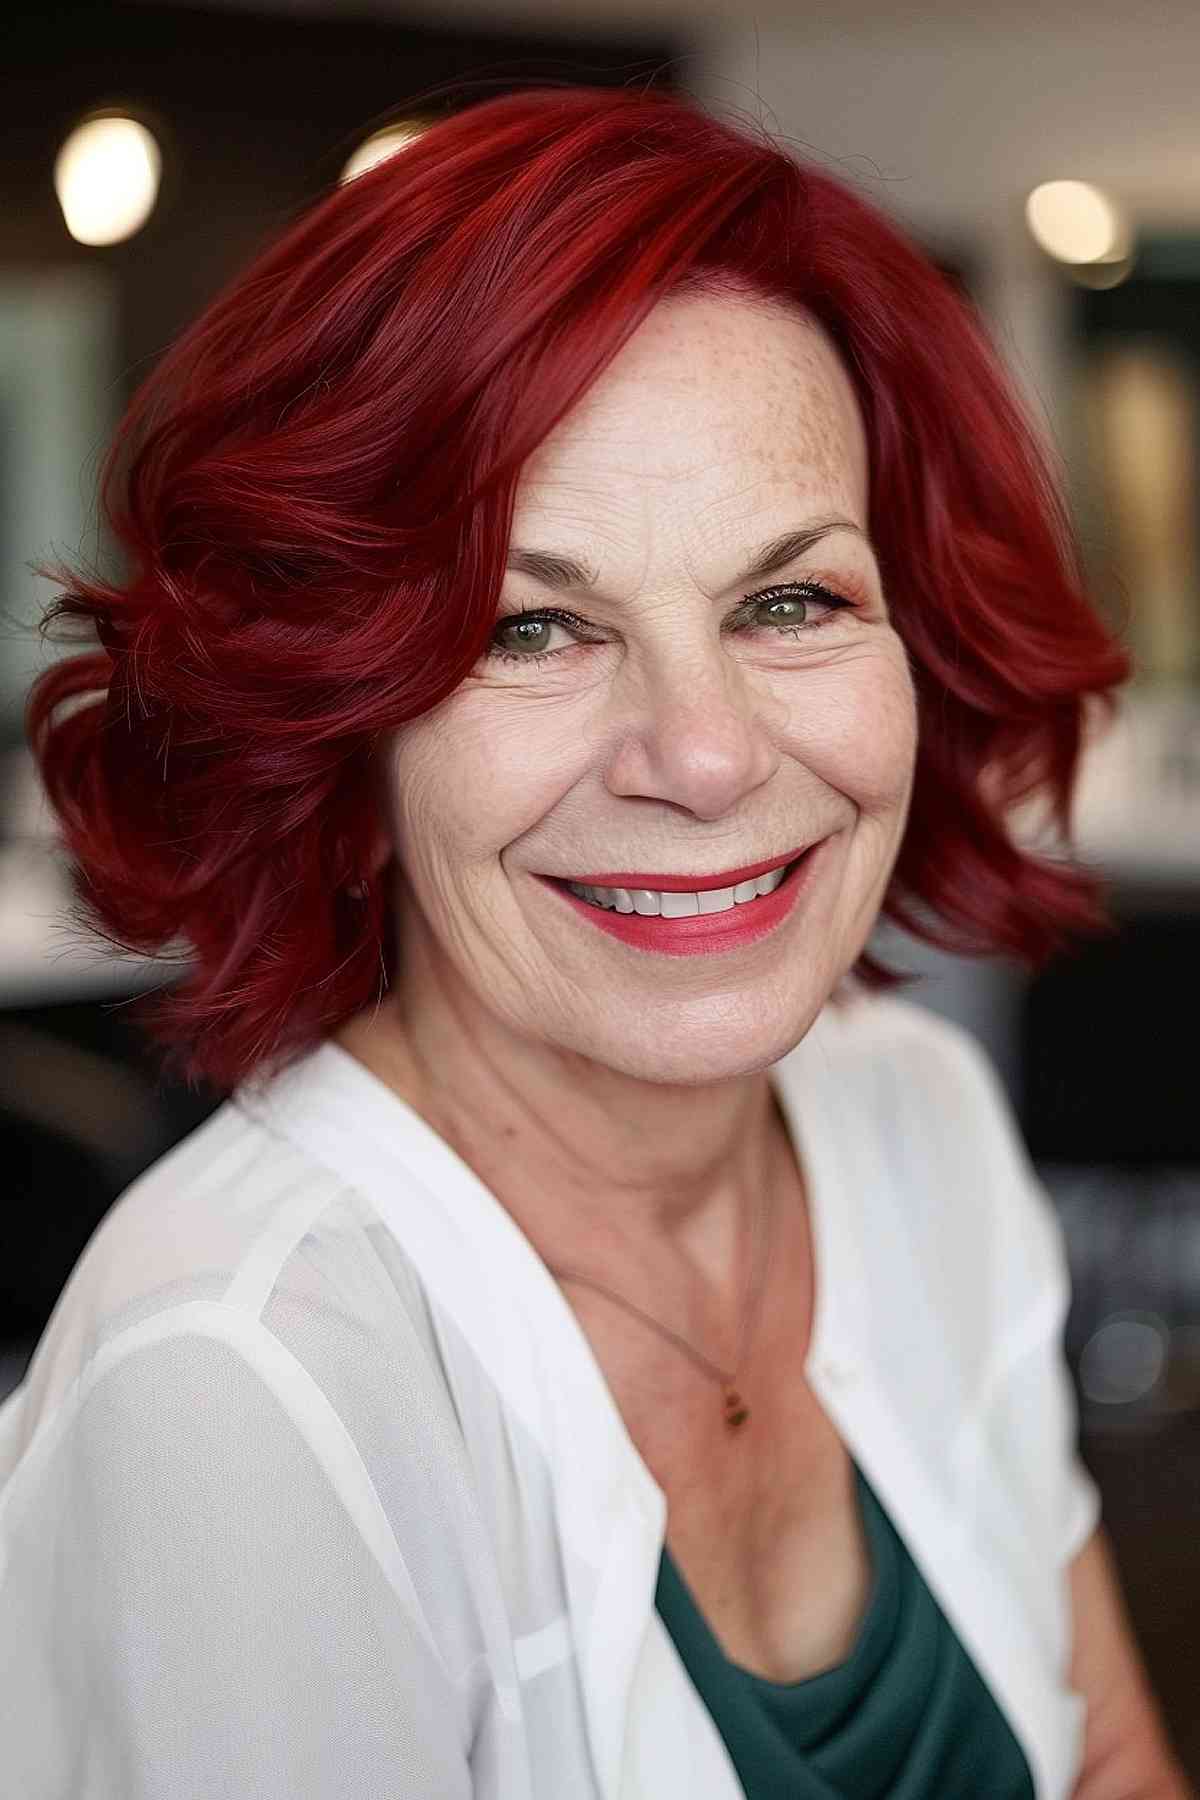 Cherry red hair with layered waves, suitable for women over 60 looking for a vibrant style.